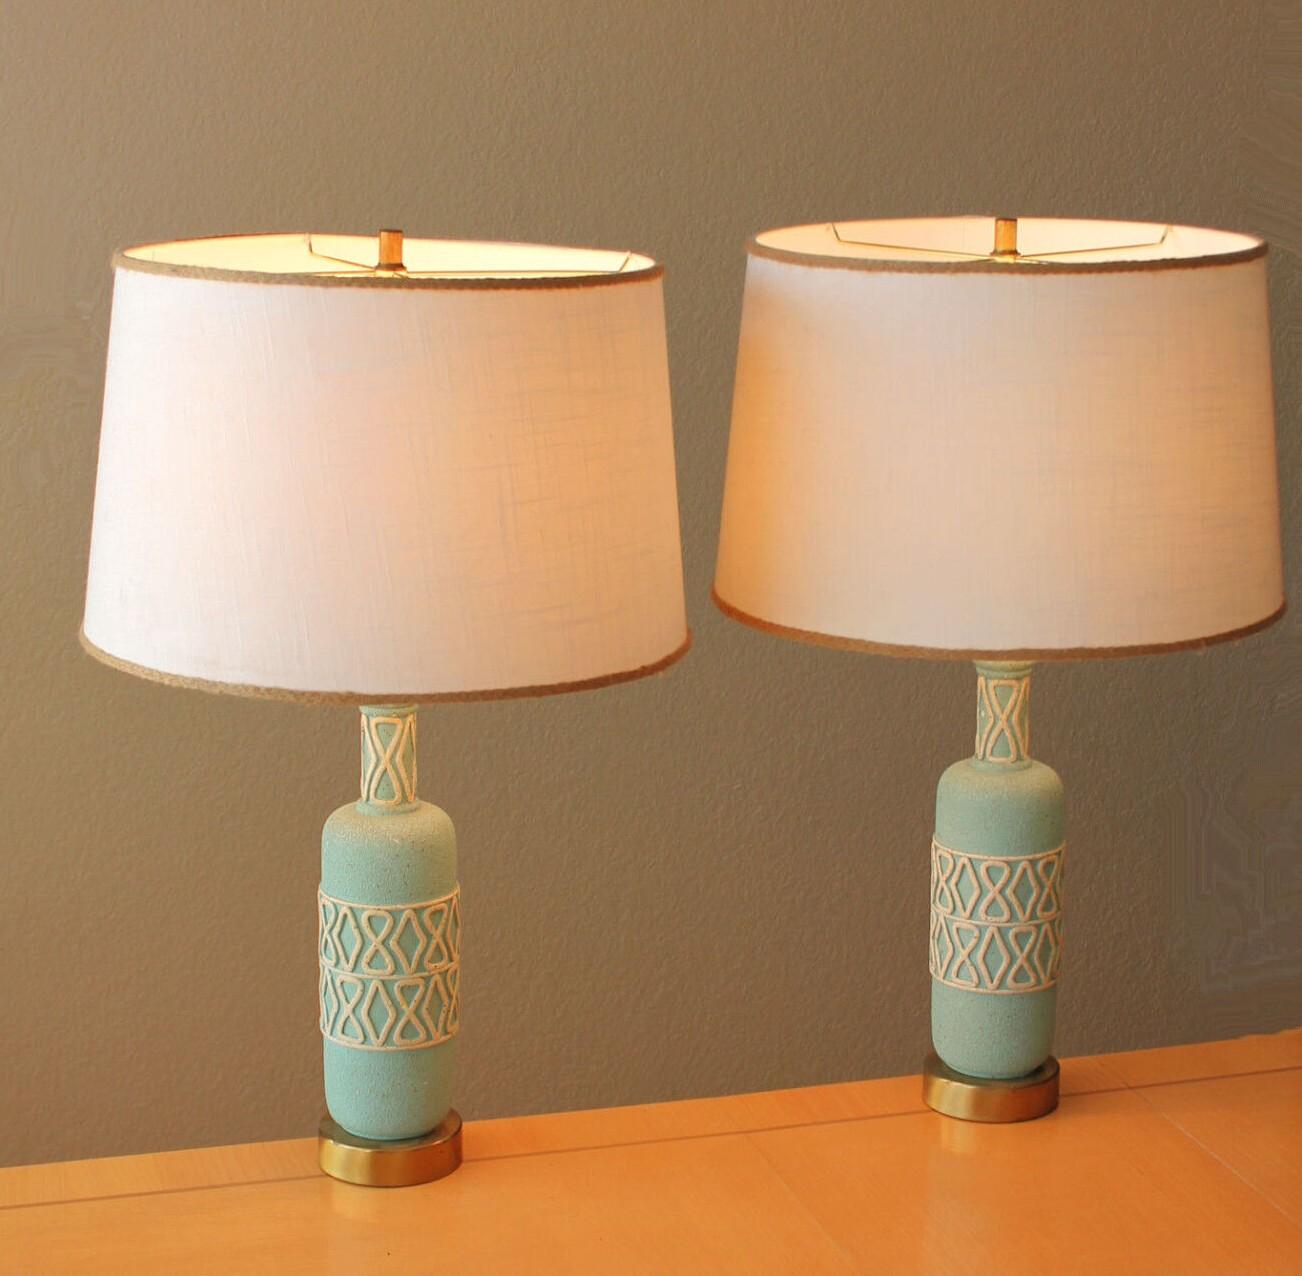 EXQUISITE!

PAIR
MID CENTURY MODERN
TABLE LAMPS
GREEK AMPHORA DESIGN
BABY BLUE WITH WHITE ACCENTS


DIMENSIONS: 28